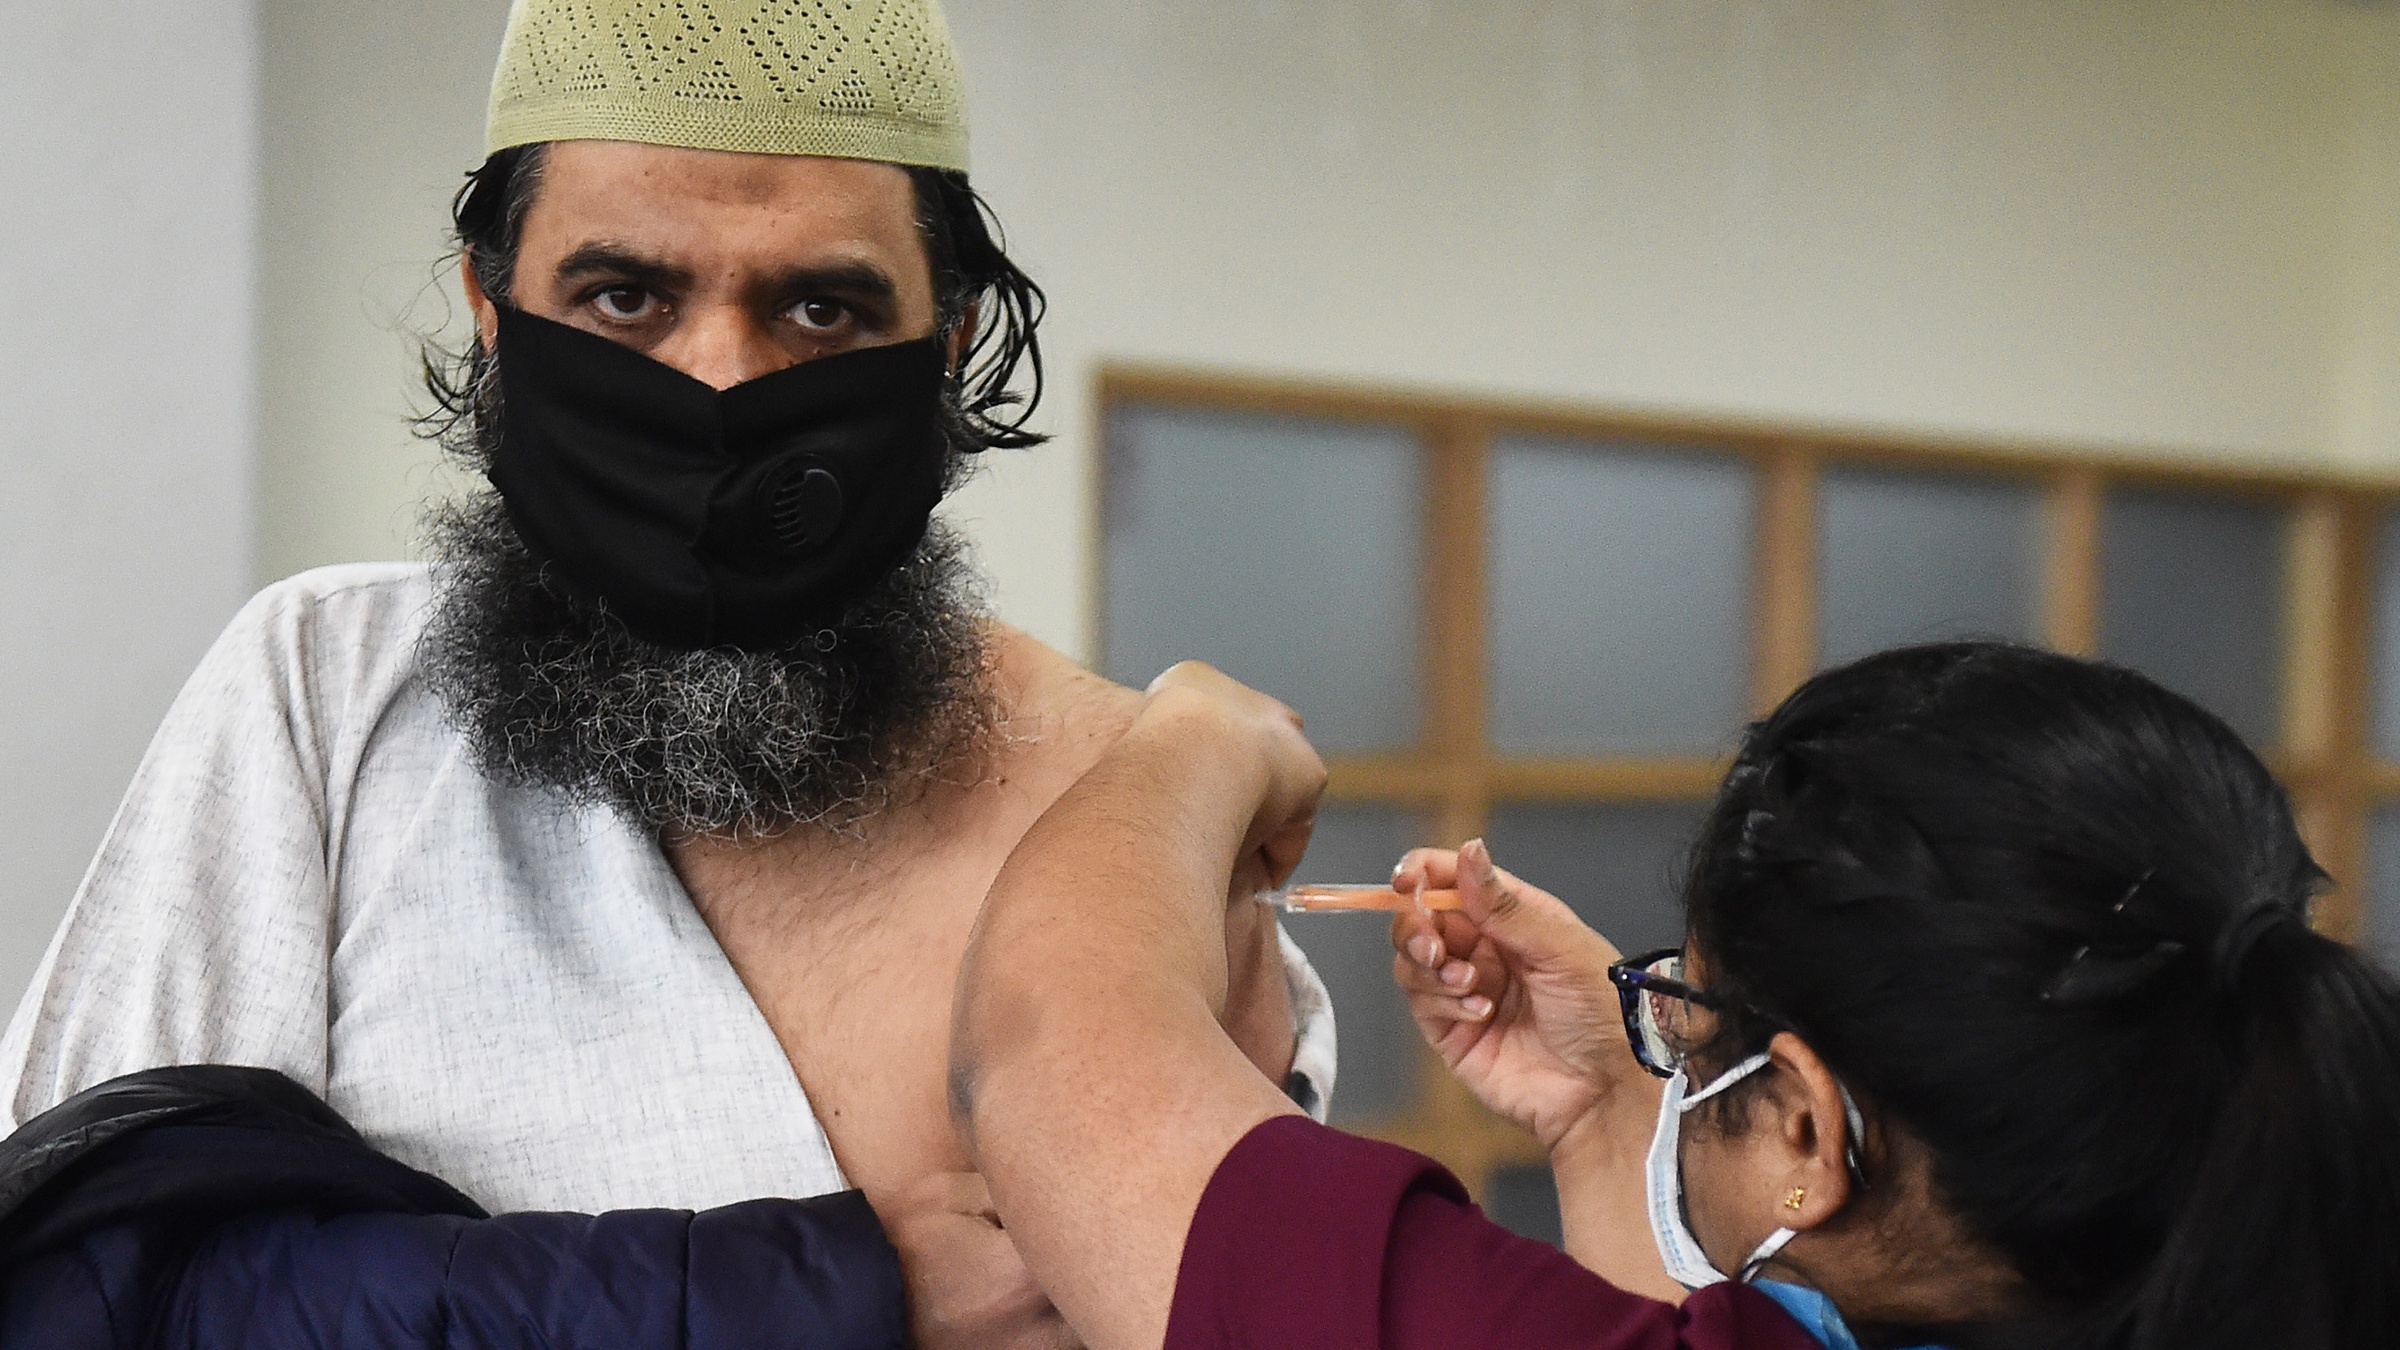 A man gets vaccinated at City Central Mosque in Stoke